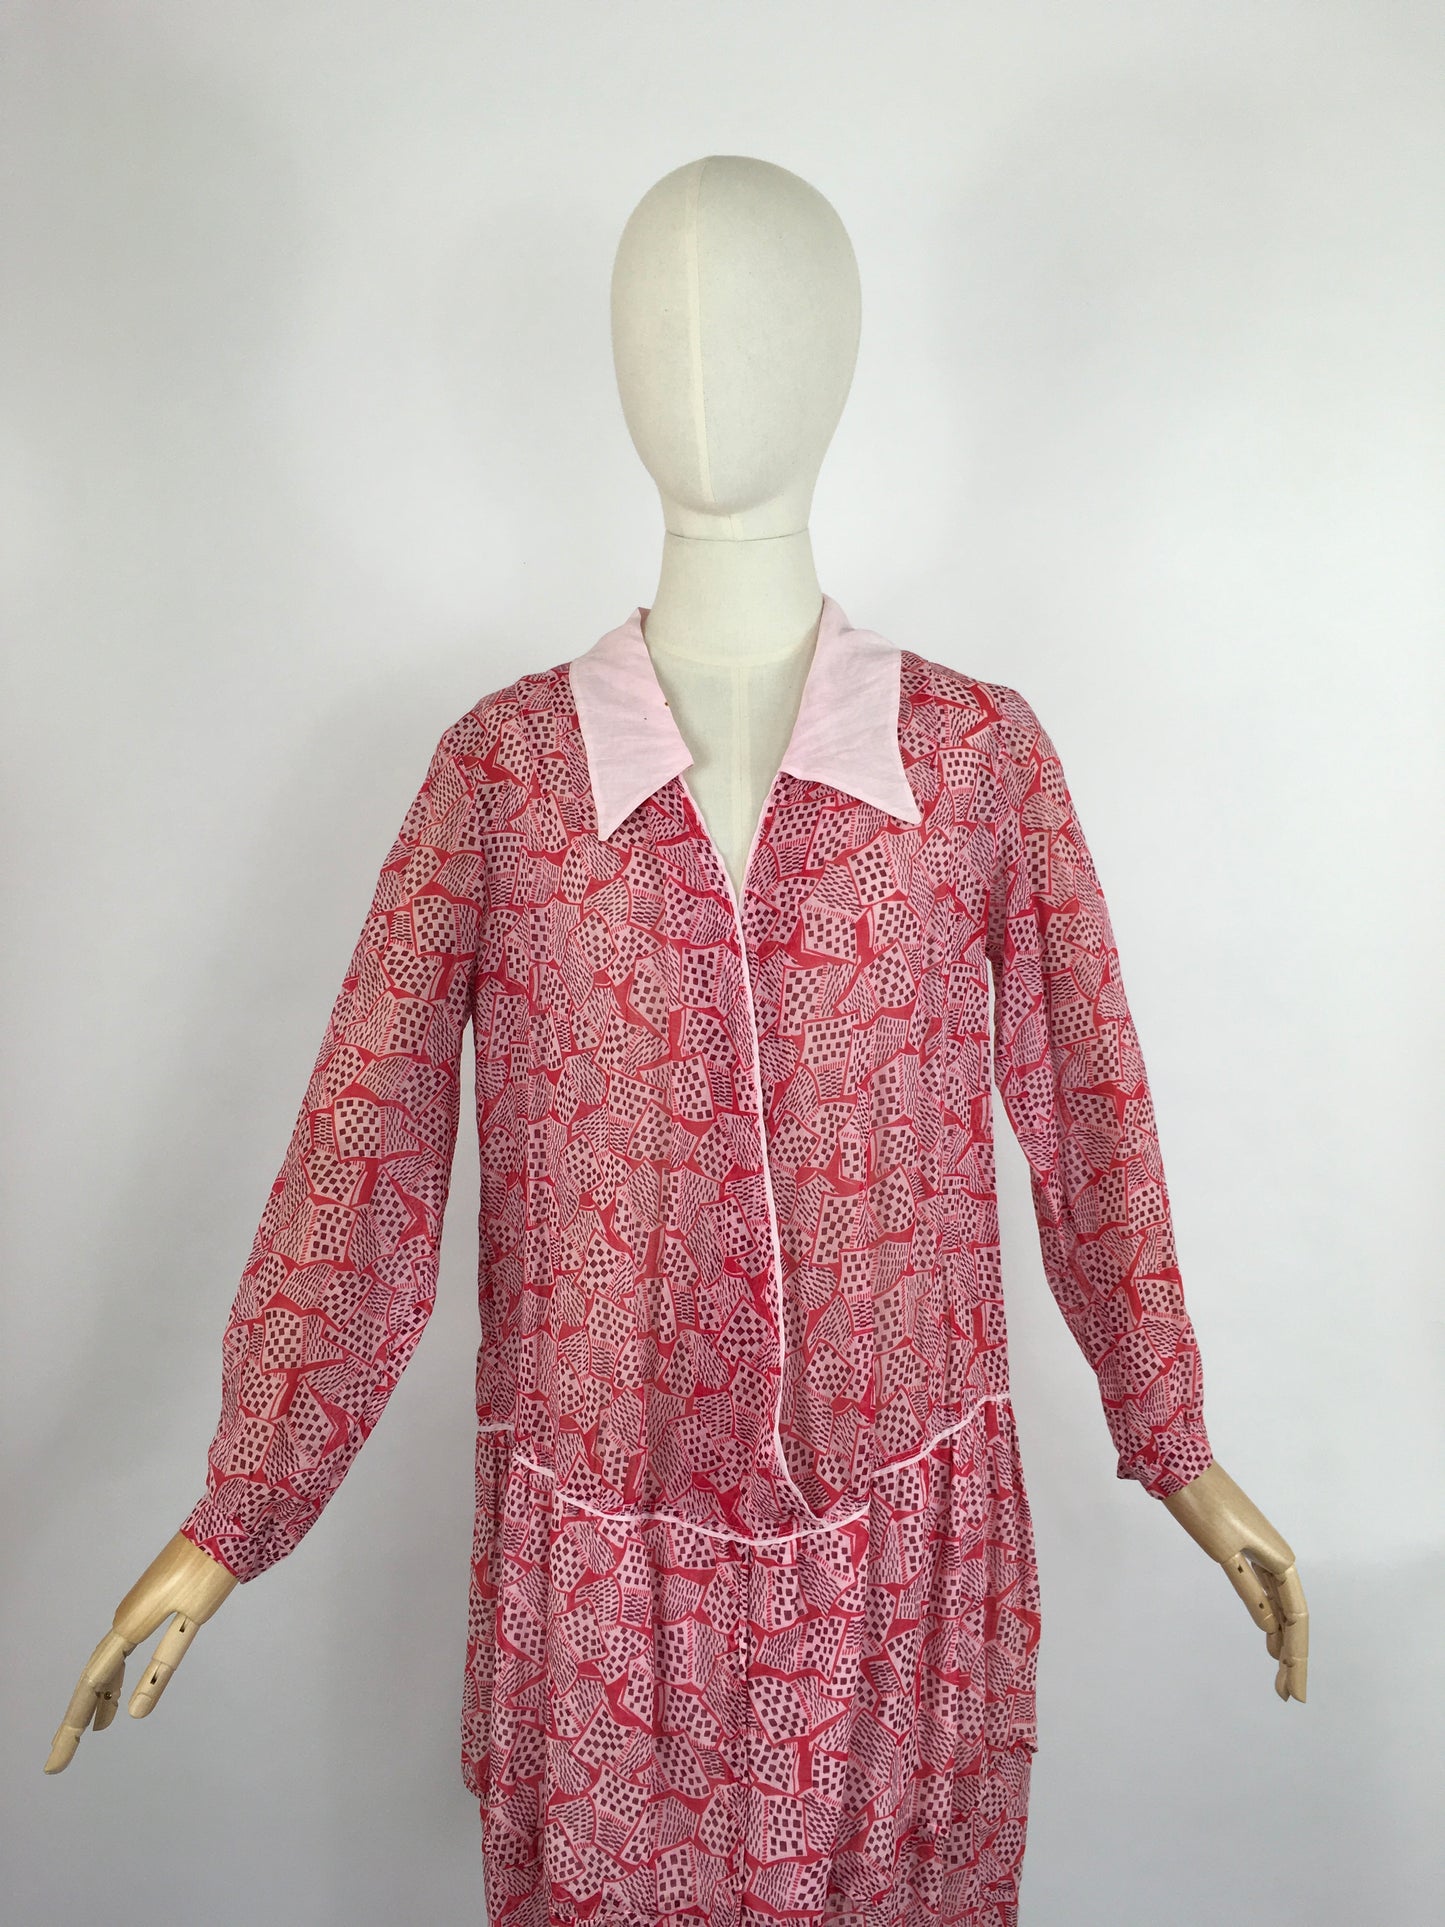 Original Early 1930s Darling Day Dress - In a Fabulous Deco Almost Book Print Cotton Lawn with Scalloped Hem Detailing